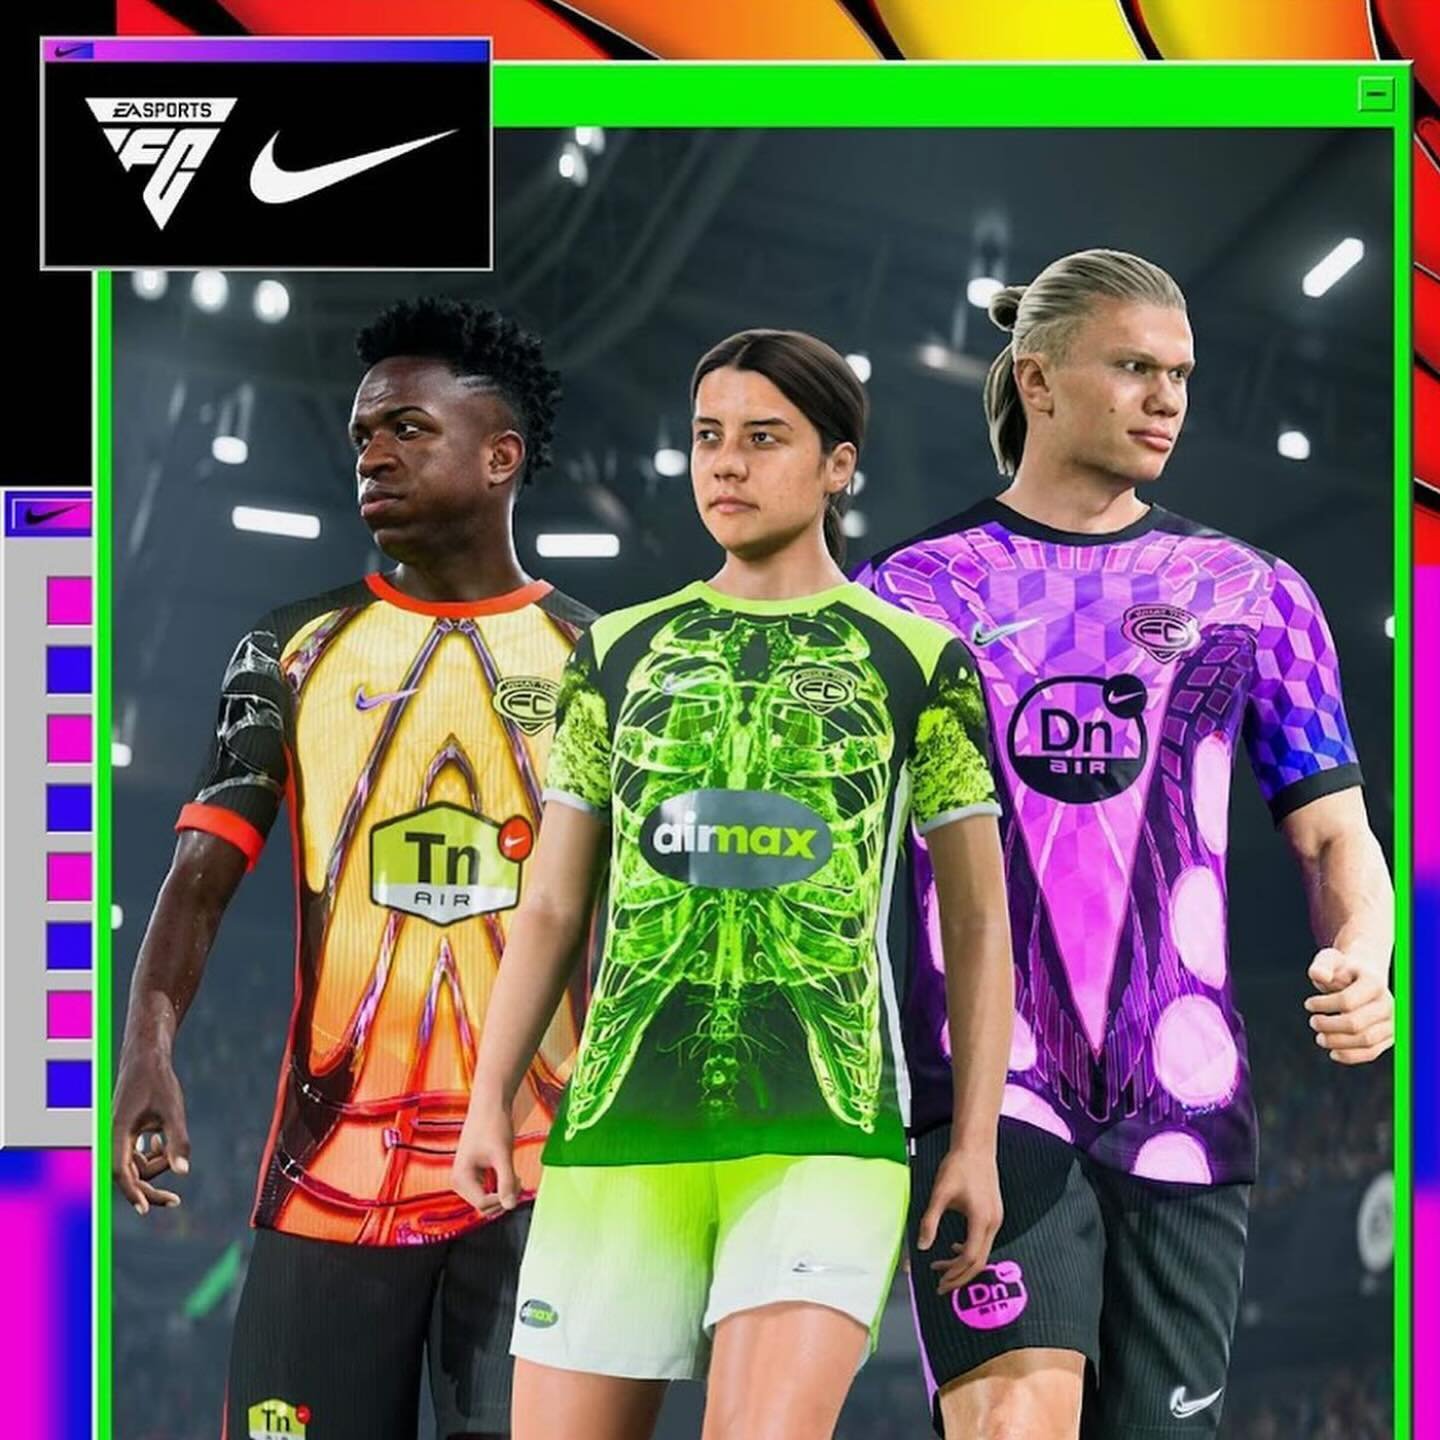 Nike and @easportsfc have revealed a &lsquo;What the FC&rsquo; collection with physical jerseys expected too! ⚽️

Which is your favourite coourway? 

#SneakerSpott #EAFC #Nike #Football